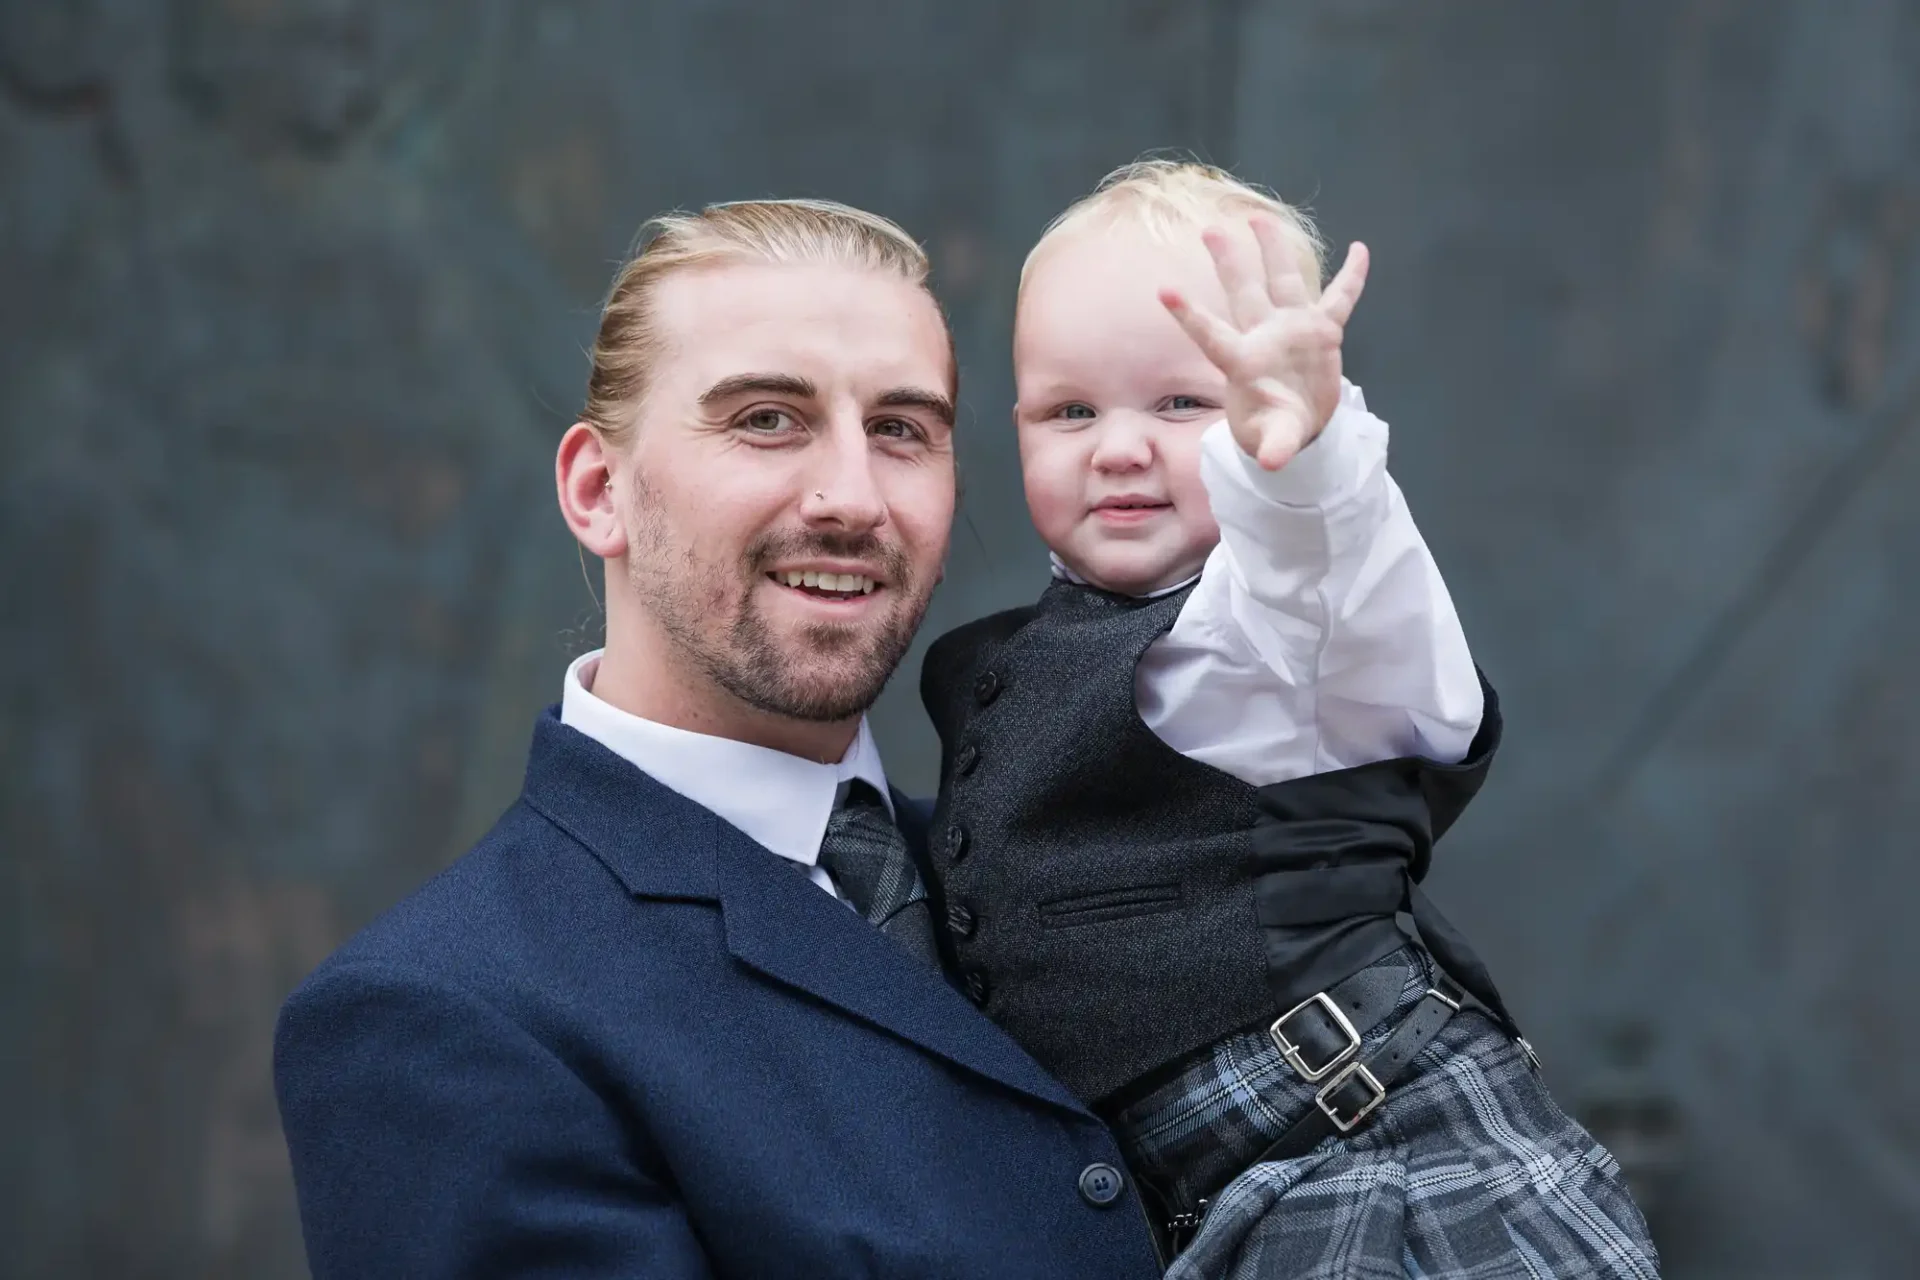 Man in a suit holding a toddler in a kilt, who is waving at the camera.